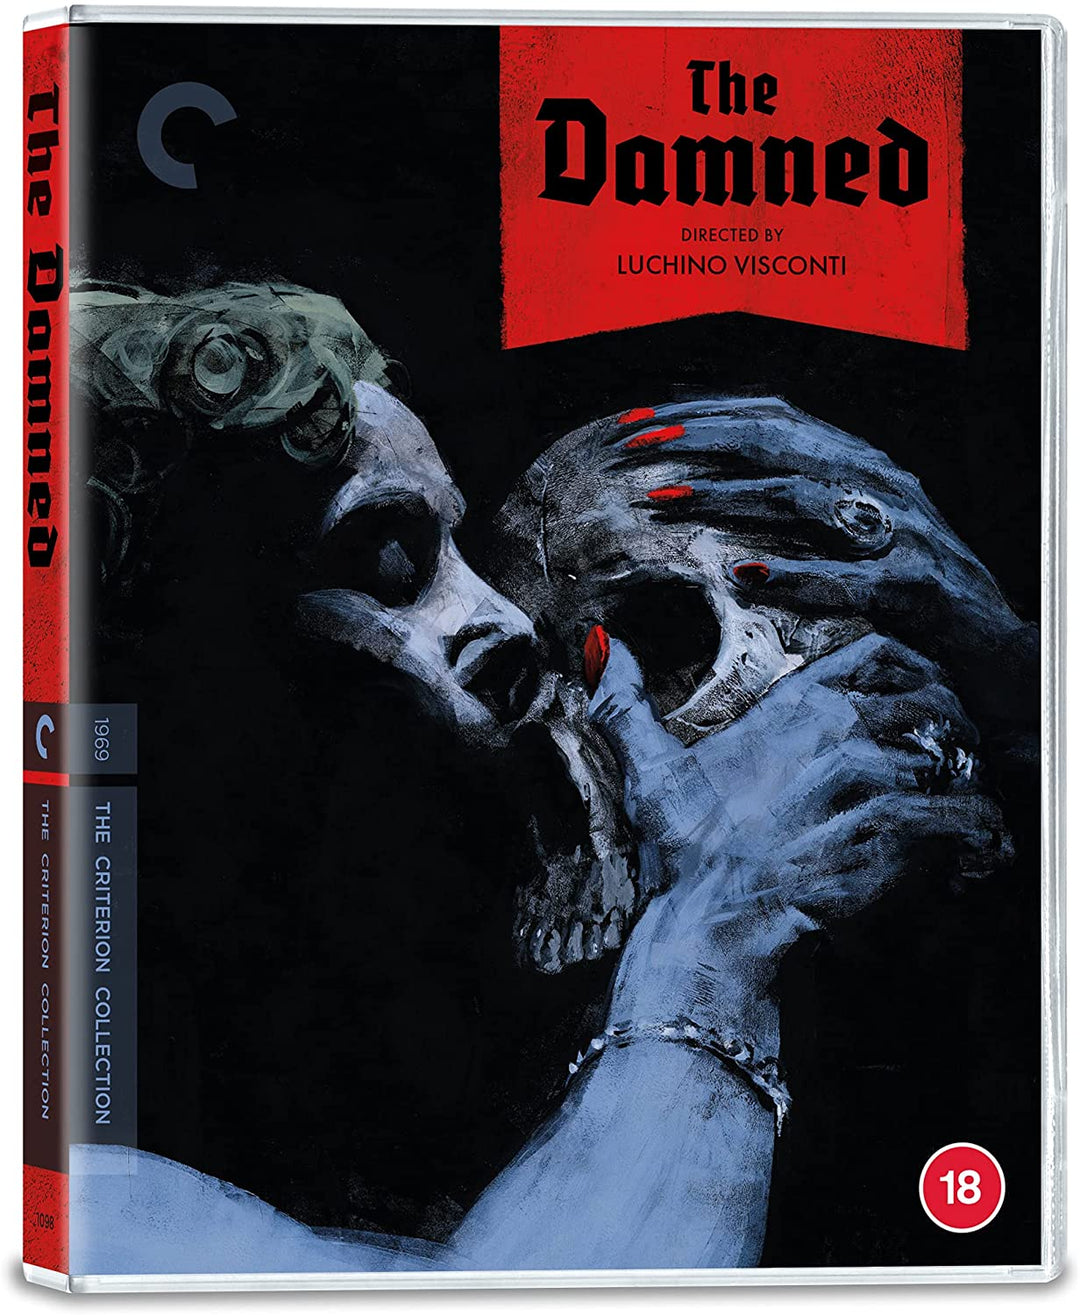 The Damned (Criterion Collection) UK Only [Blu-ray]